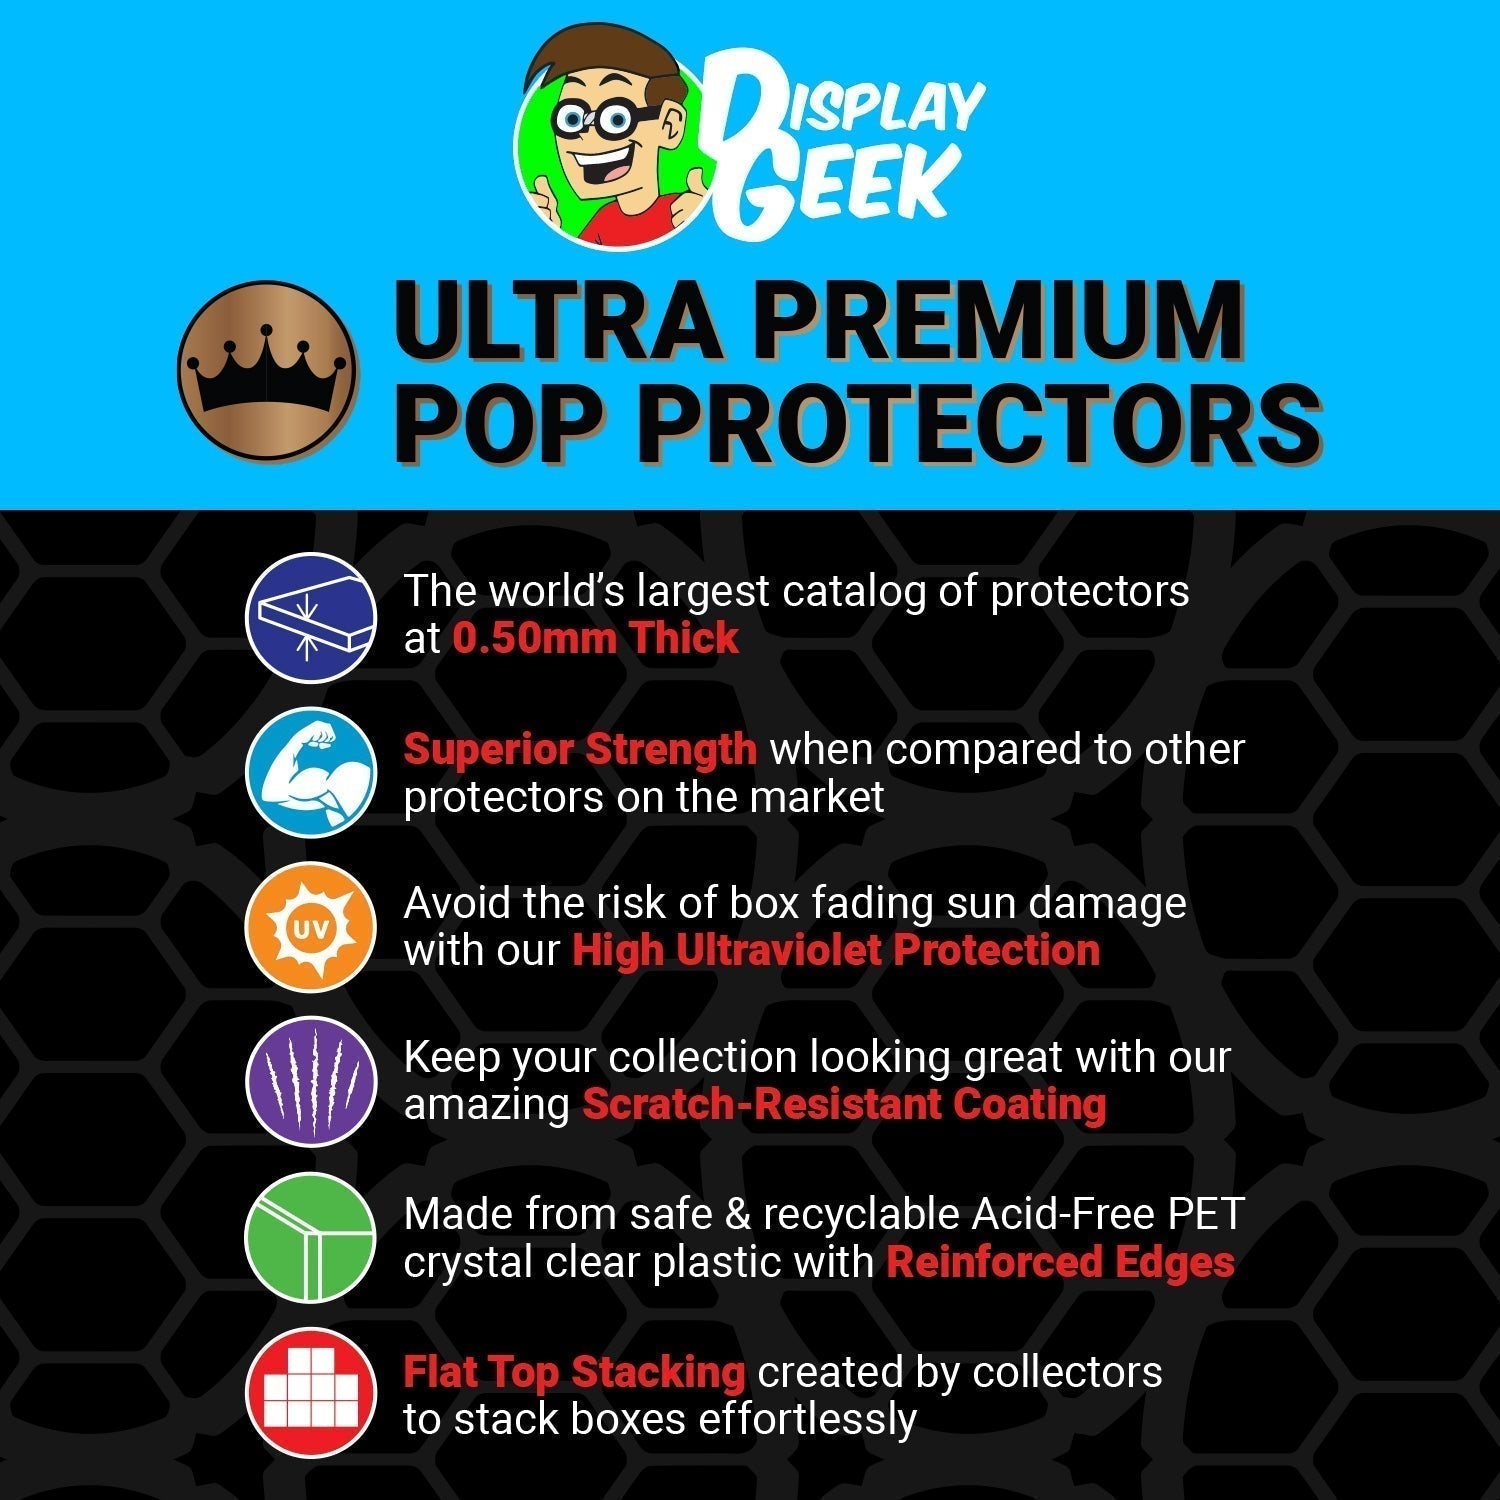 Pop Protector for Derrick Rose #11 Funko Pop Magazine Covers - PPG Pop Protector Guide Search Created by Display Geek